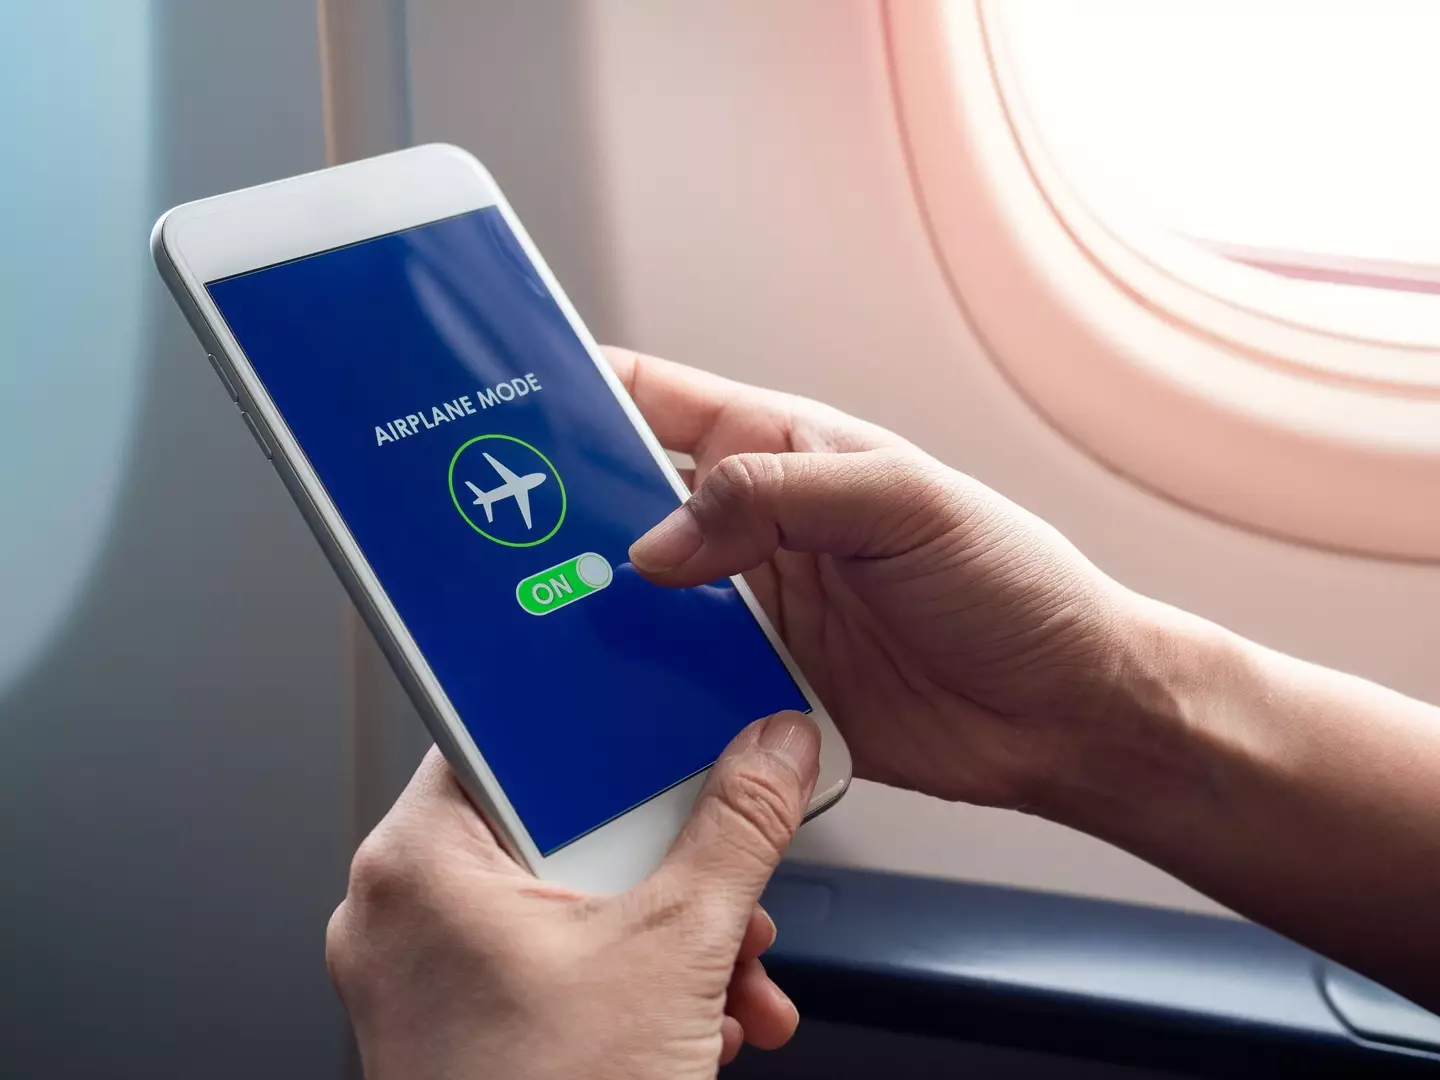 Passengers are always told to put their devices on flight mode.